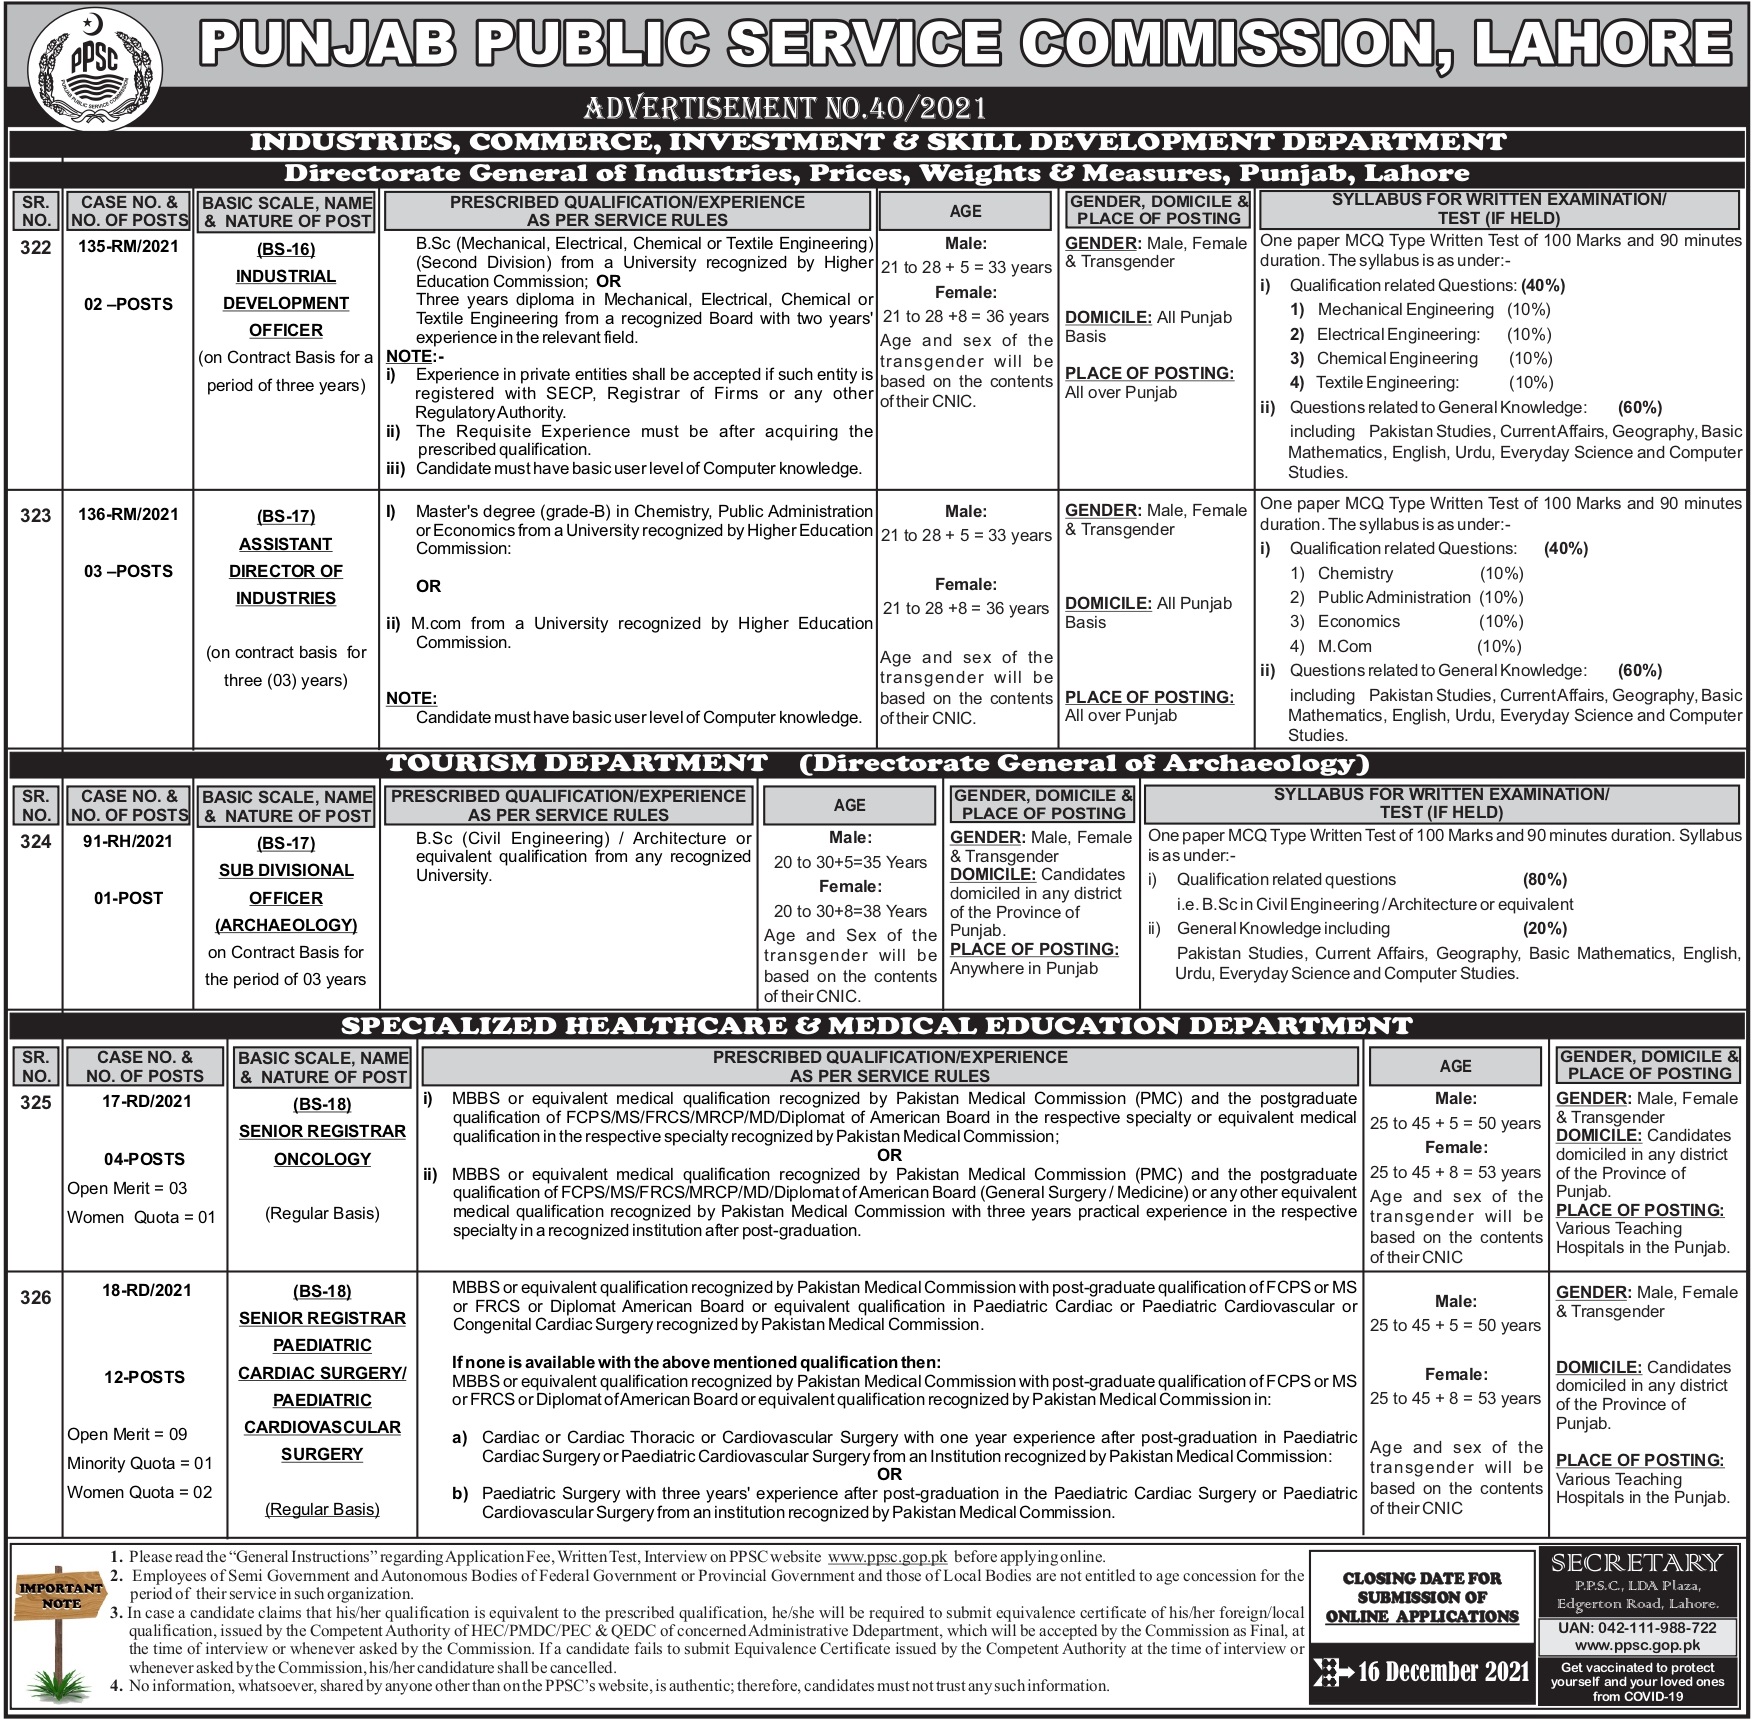 PPSC Specialized Healthcare & Medical Education Jobs 2021 Apply Online